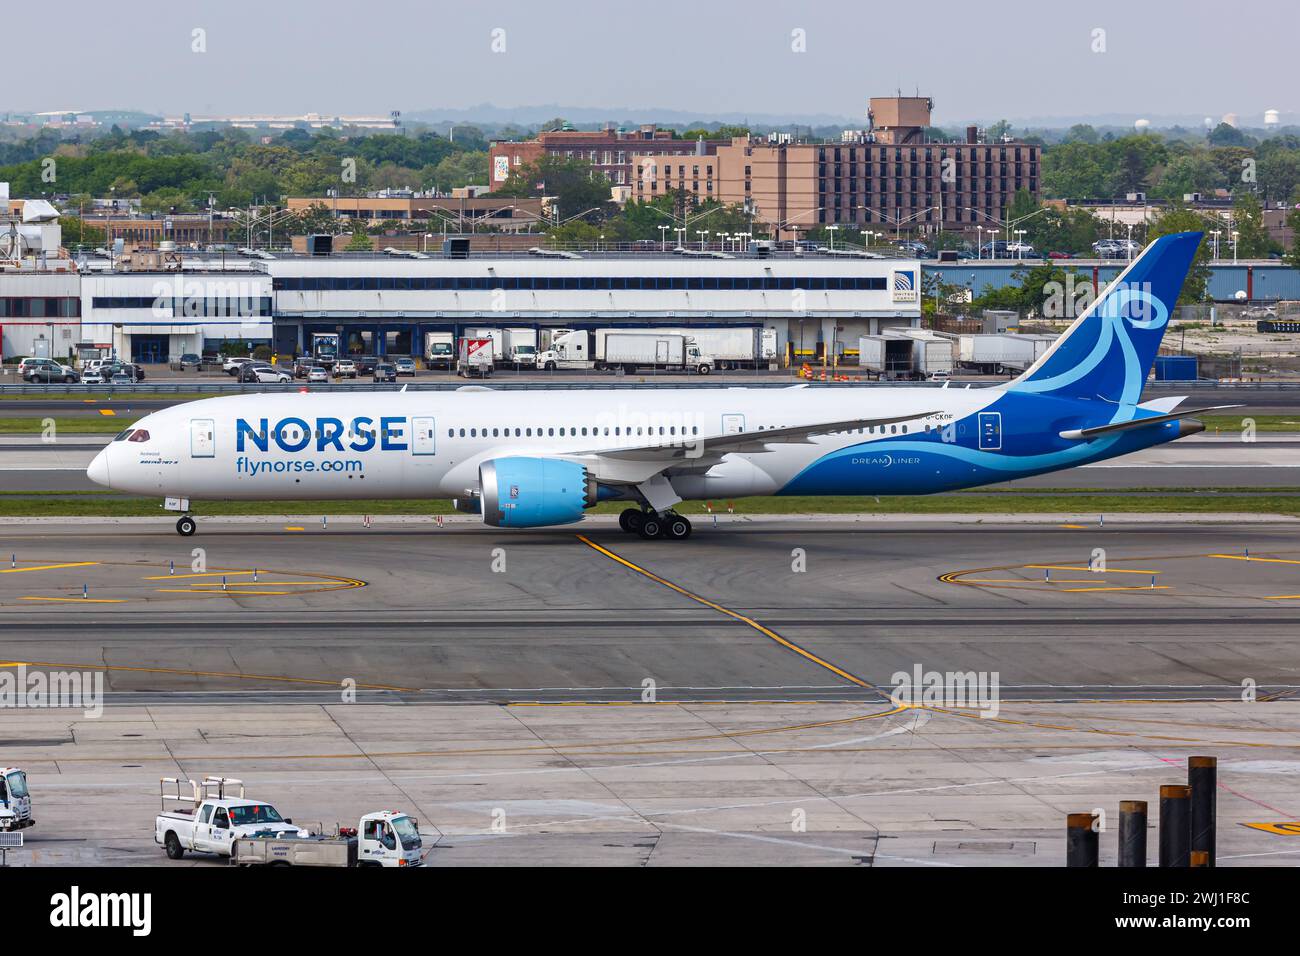 Norse Boeing 787-9 Dreamliner airplane New York JFK airport in the USA Stock Photo